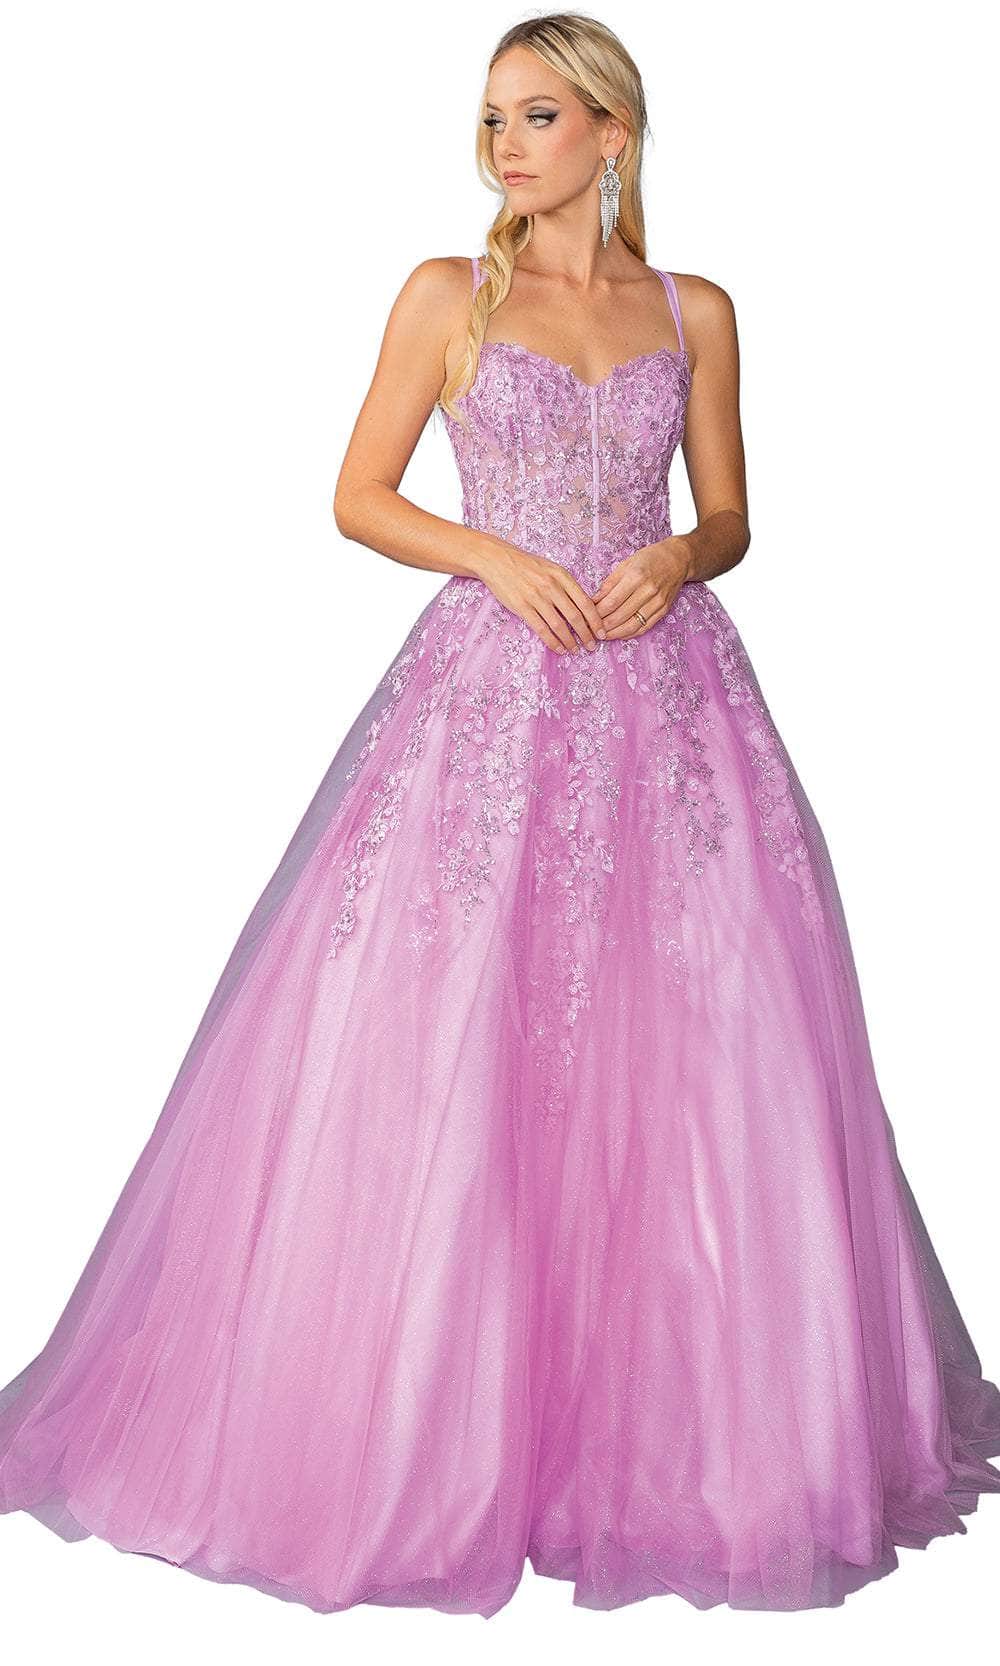 Image of Dancing Queen 4458 - Embroidered Corset Bodice Ballgown